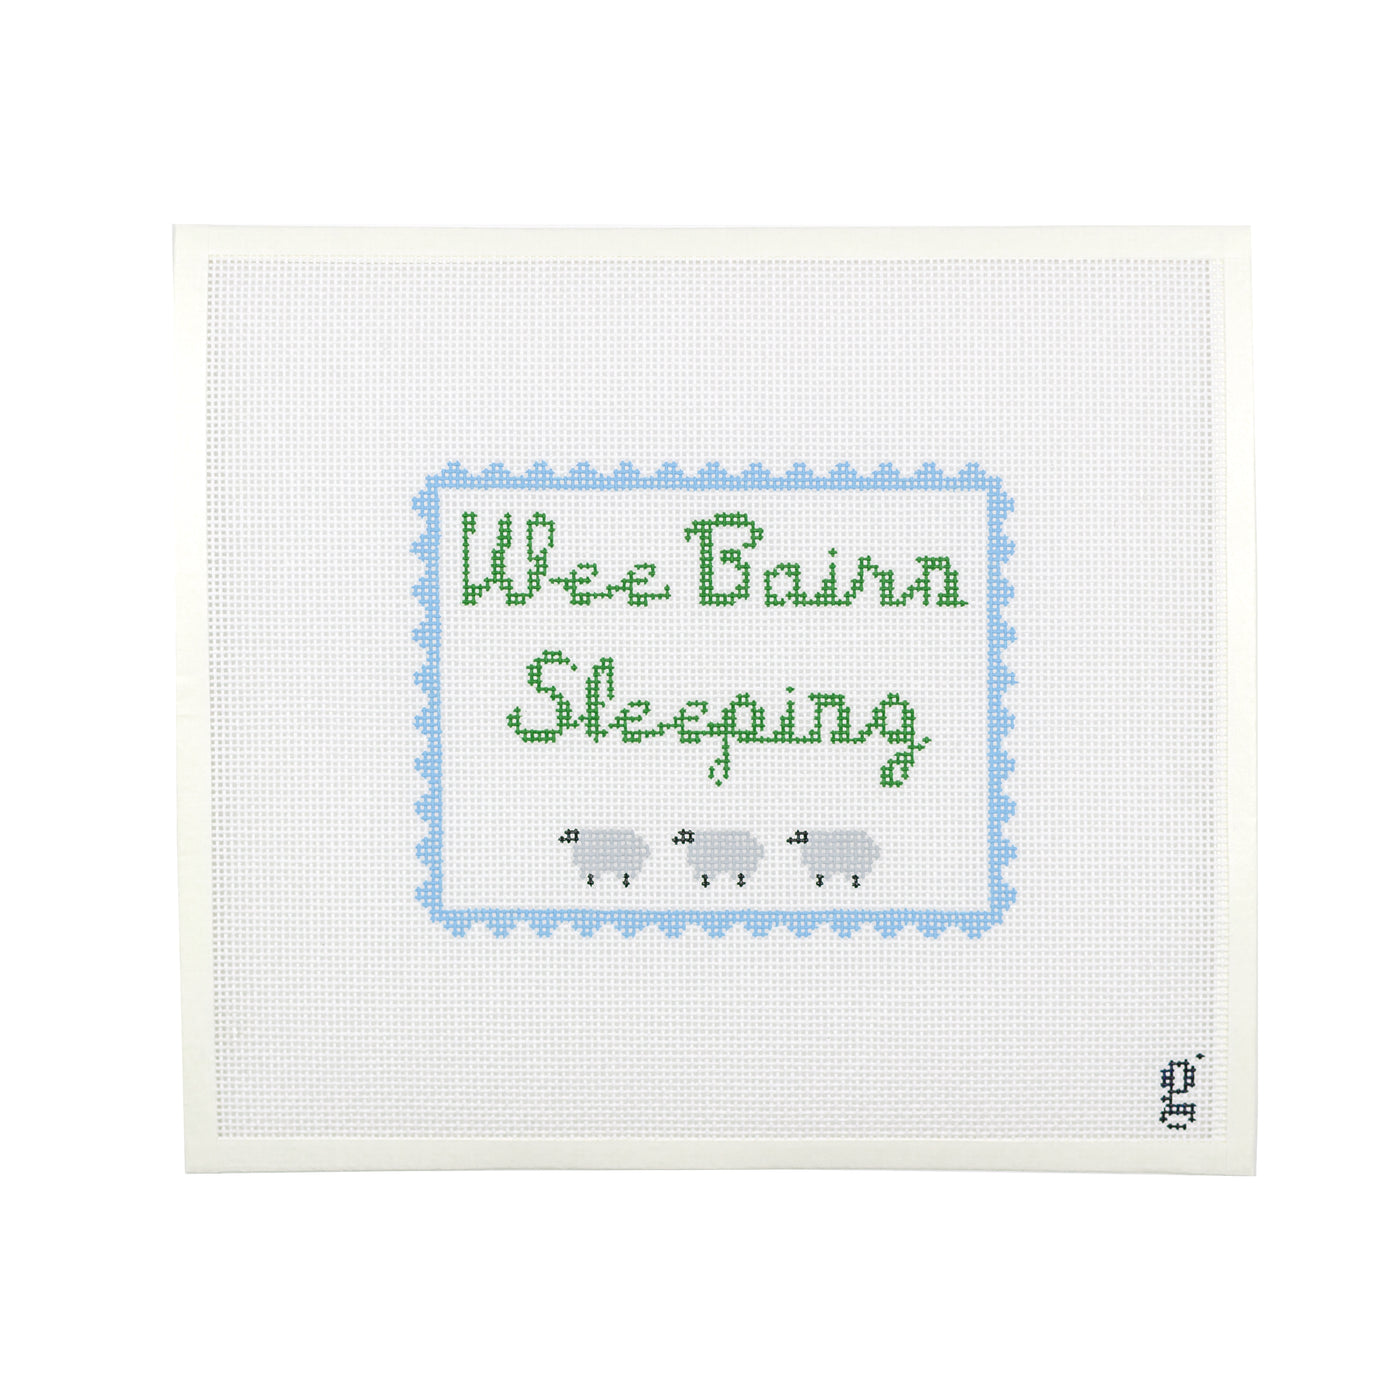 Painted needlepoint canvas with light blue scalloped border, green script letters spelling out "Wee Bairn Sleeping" with 3 grey sheep at the bottom